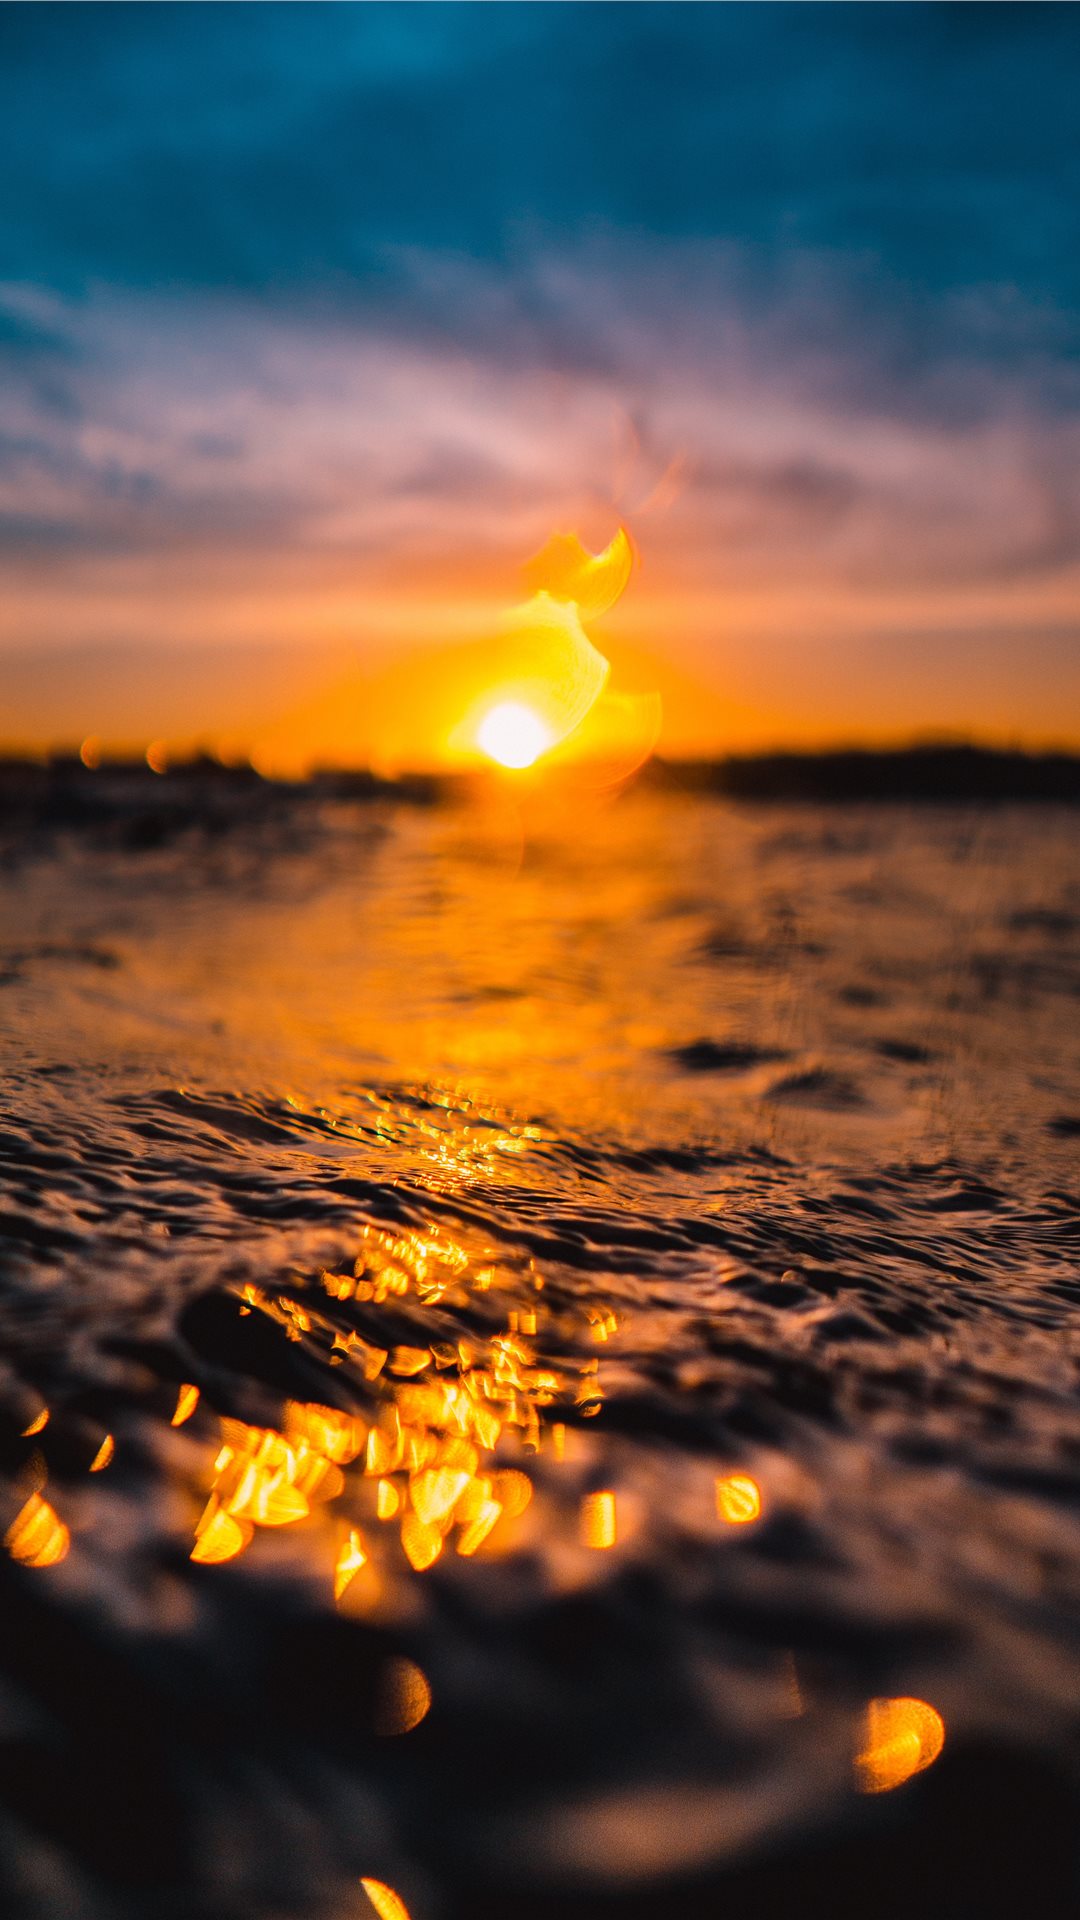 Sunset Water Background Iphone - HD Wallpaper 